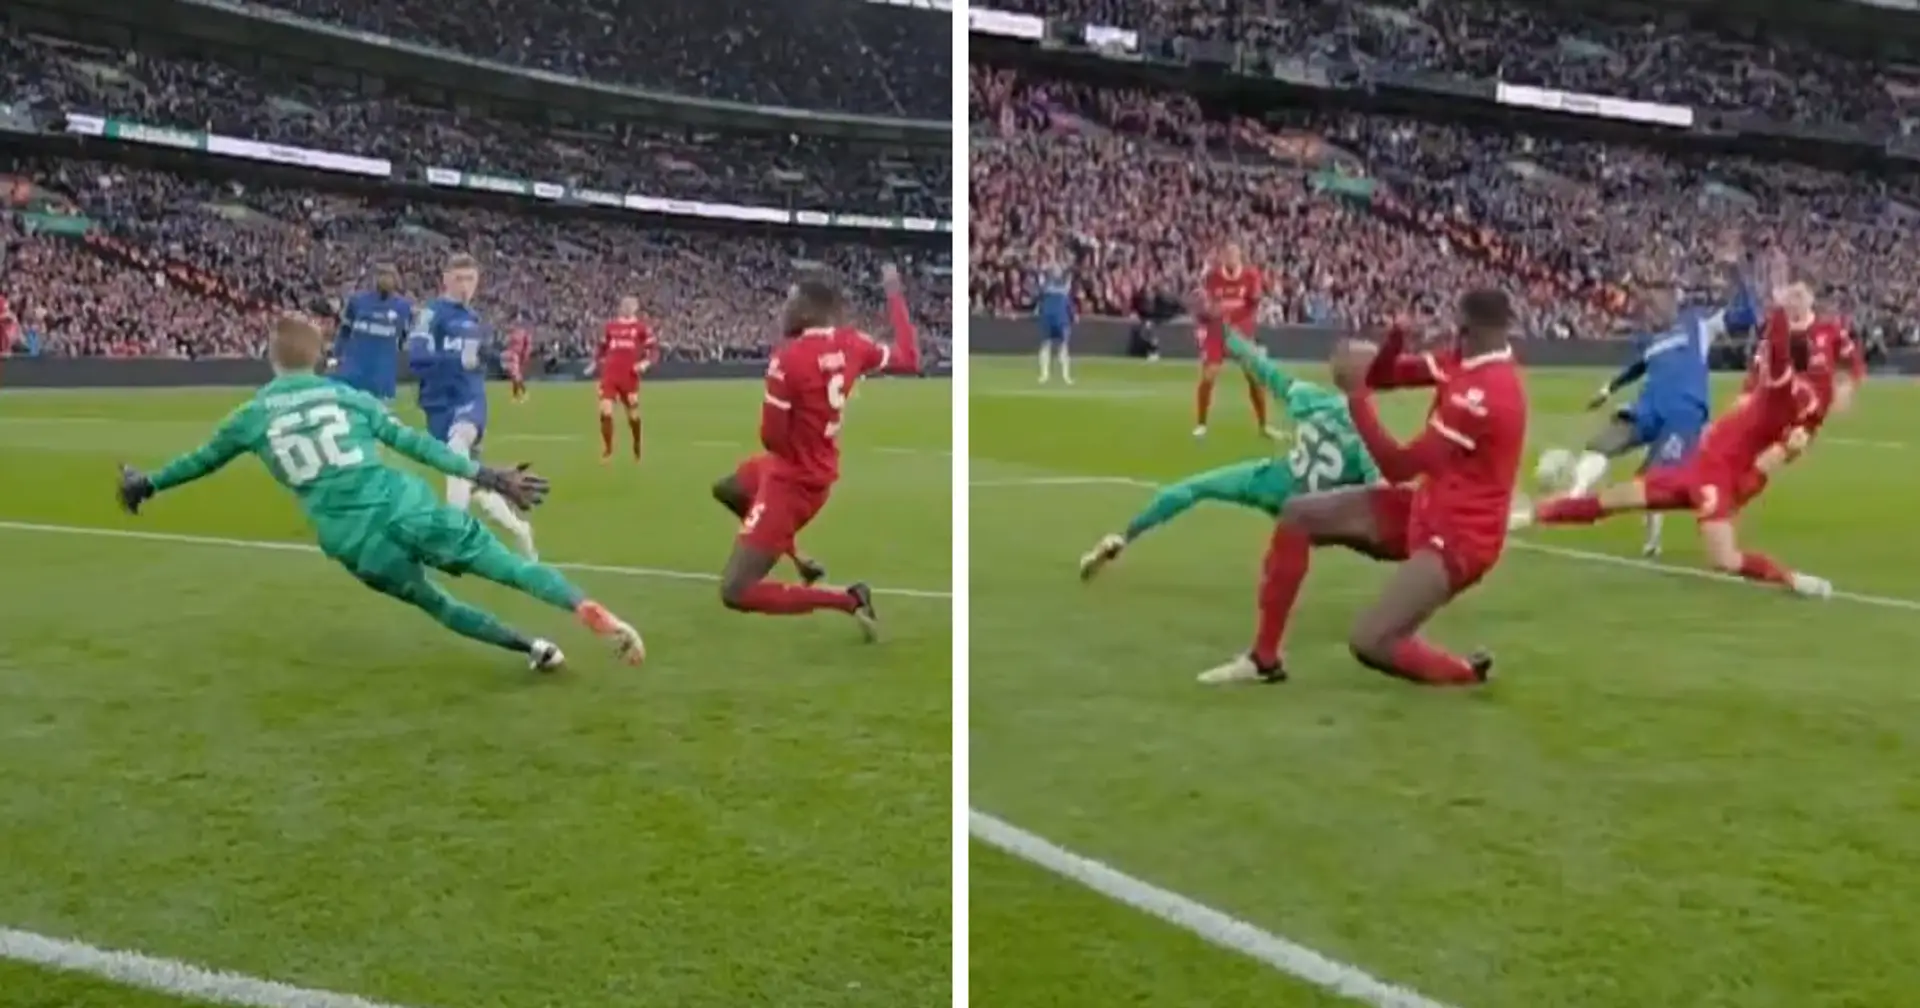 Caoimhin Kelleher saves the day for Liverpool with incredible save